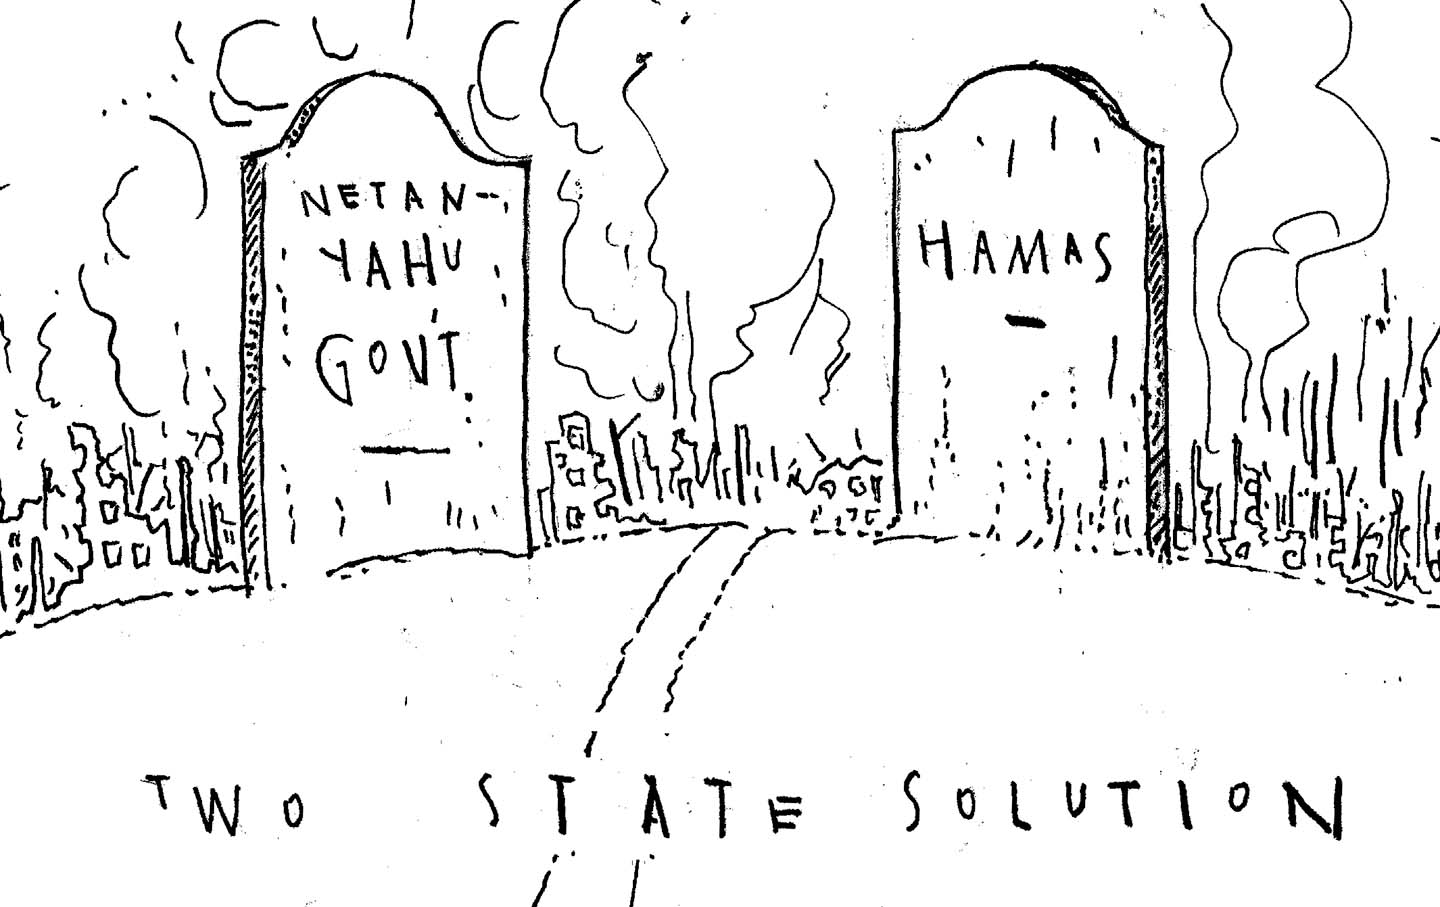 Two-State Solution